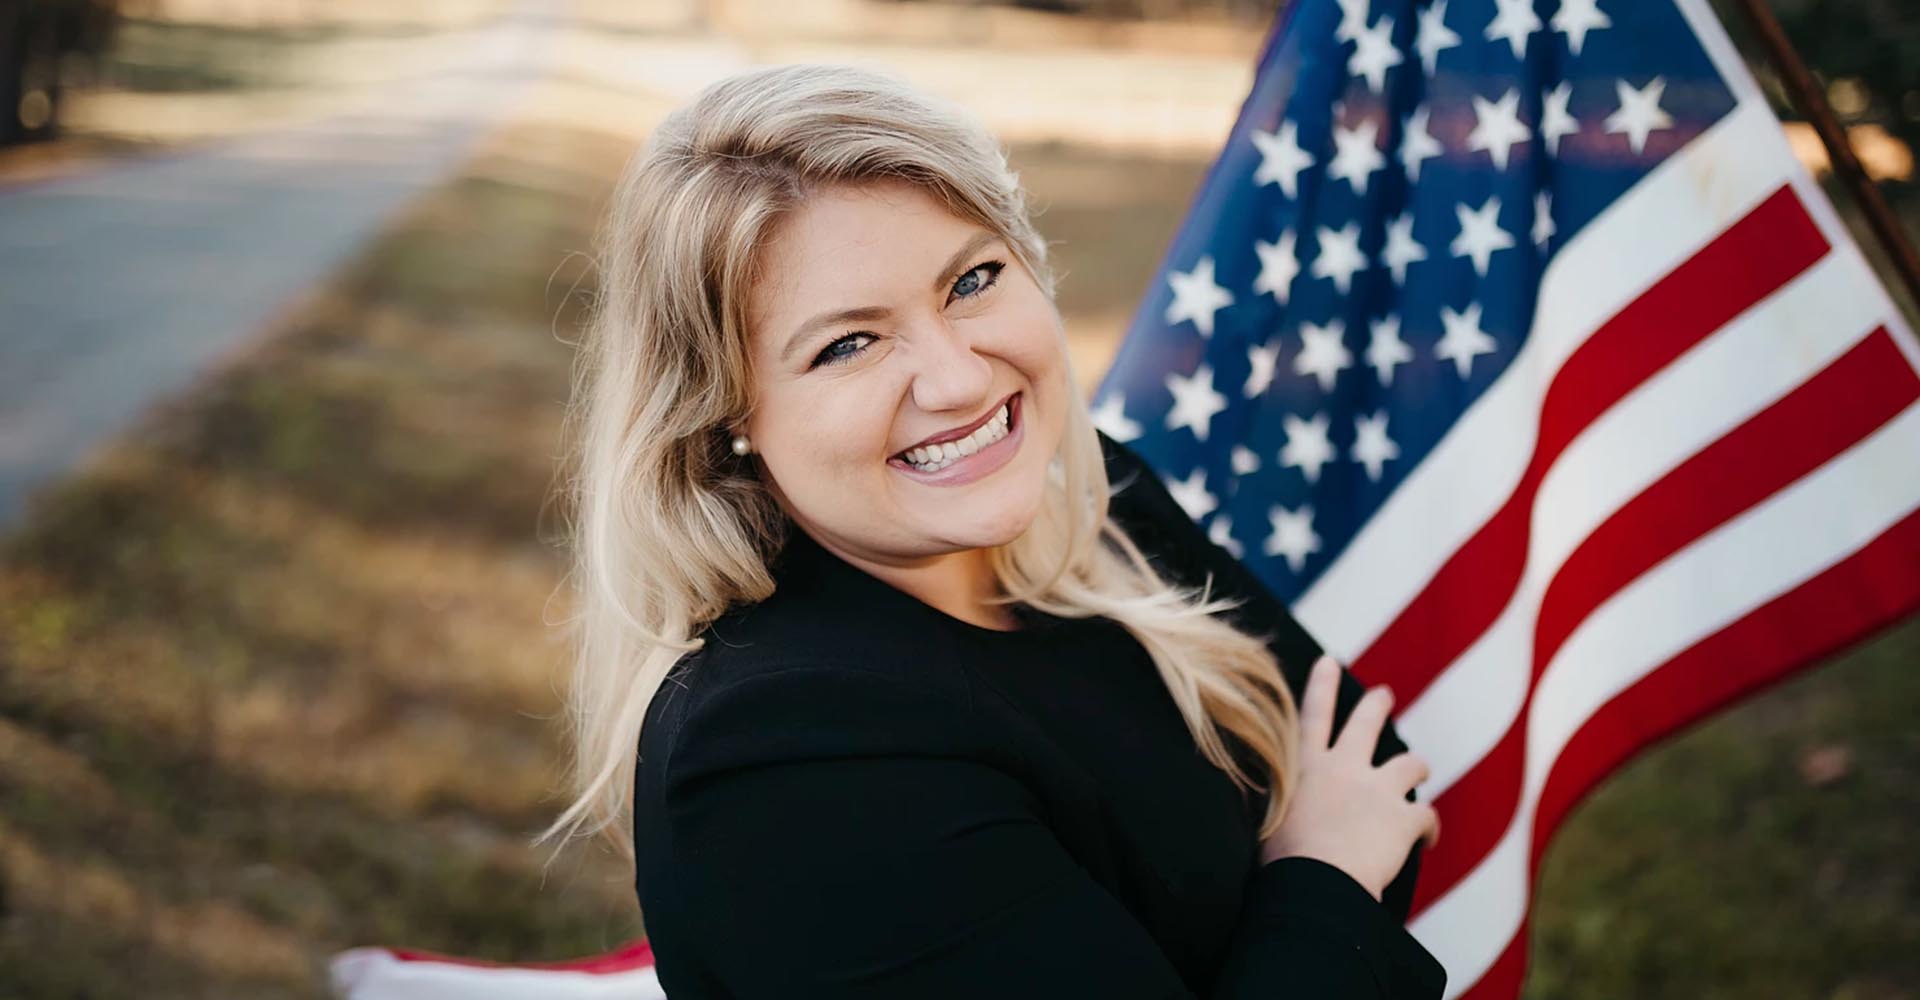 Kat Cammack was once homeless. Now, she’s the youngest Republican woman in the U.S. House.